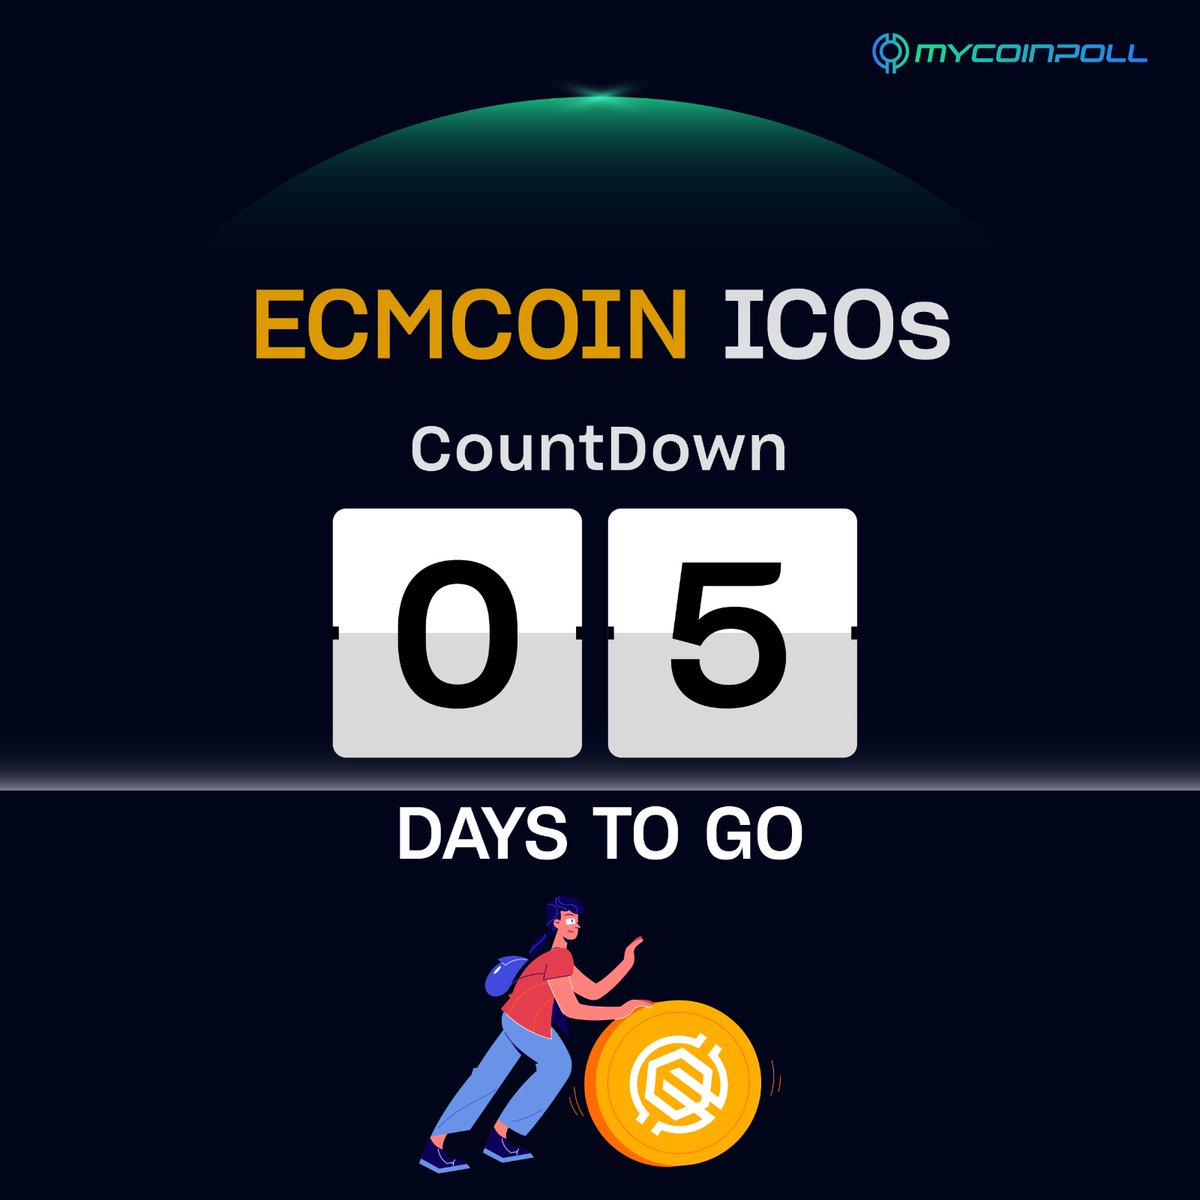 Dear valued members,

We would like to inform you that the public presale of the 💰 ECM Coin Initial Coin Offering (ICO) will commence in 🔜 5 days. We encourage you to take advantage of this opportunity to purchase ECM Coin at a discounted price by visiting our website. This…